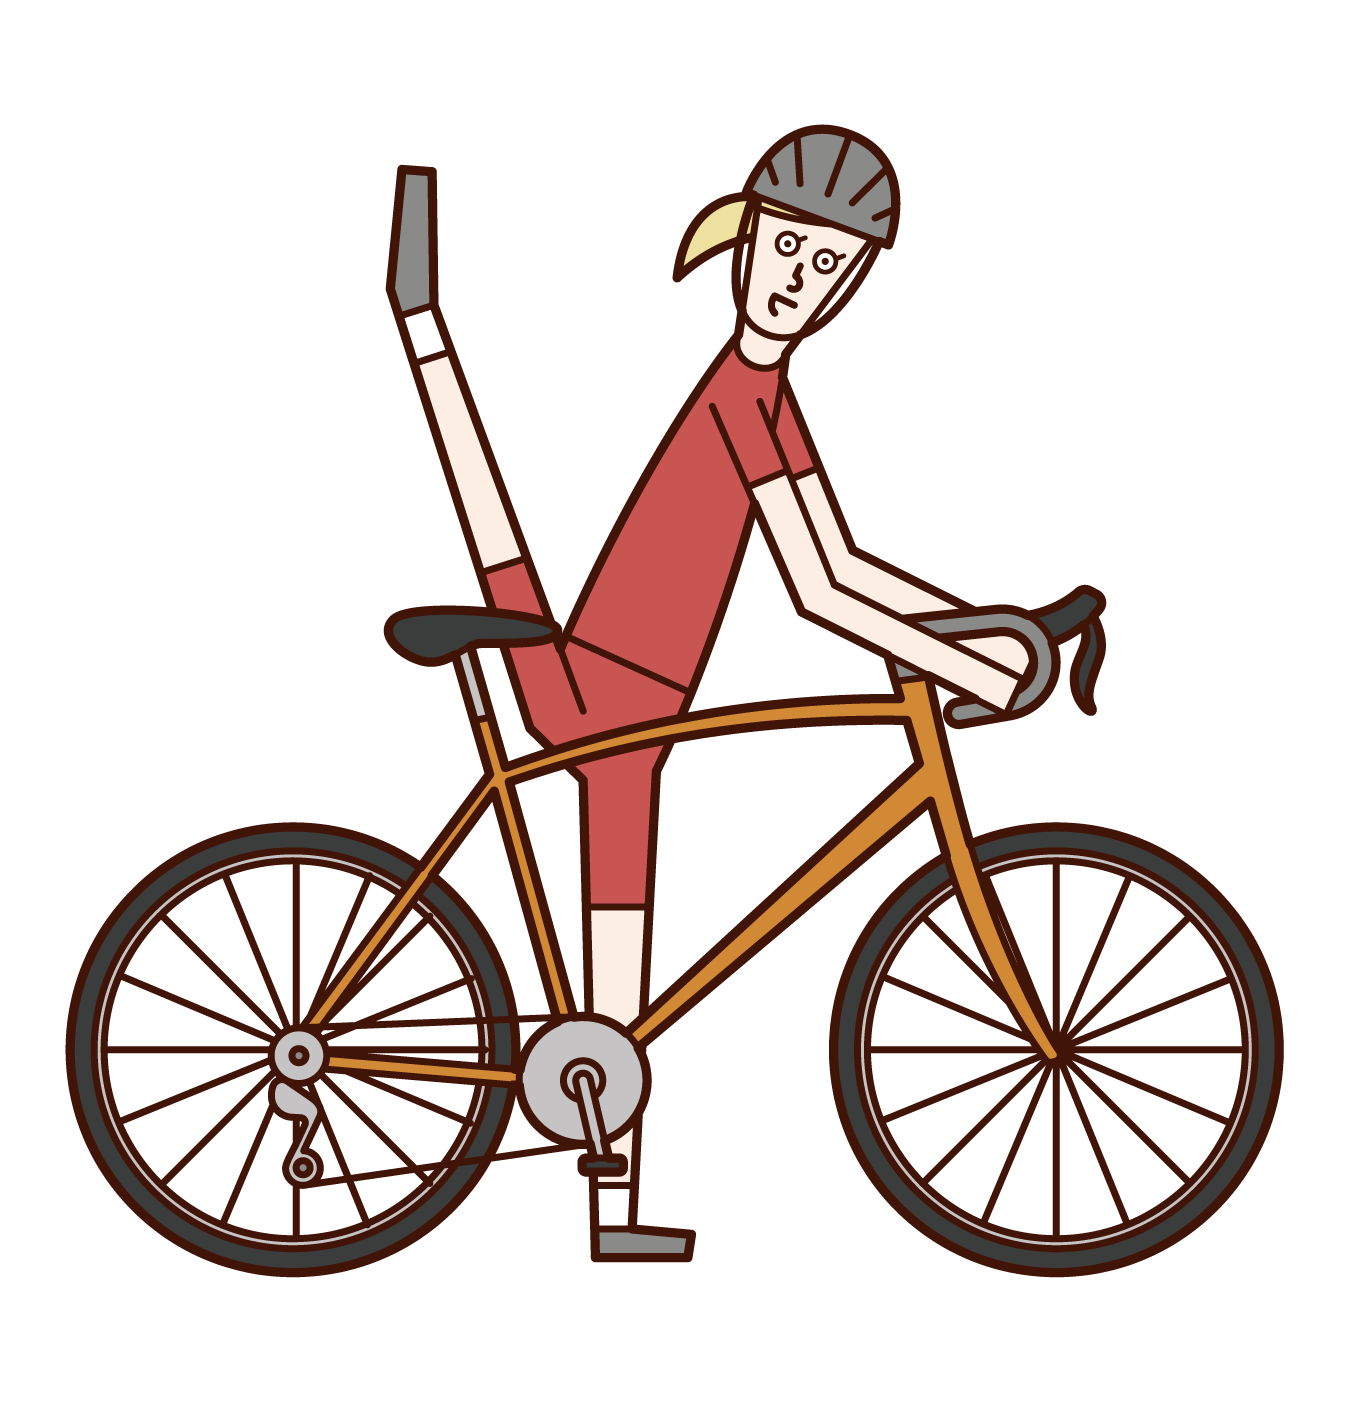 Illustration of a person (woman) riding a bicycle with his legs high